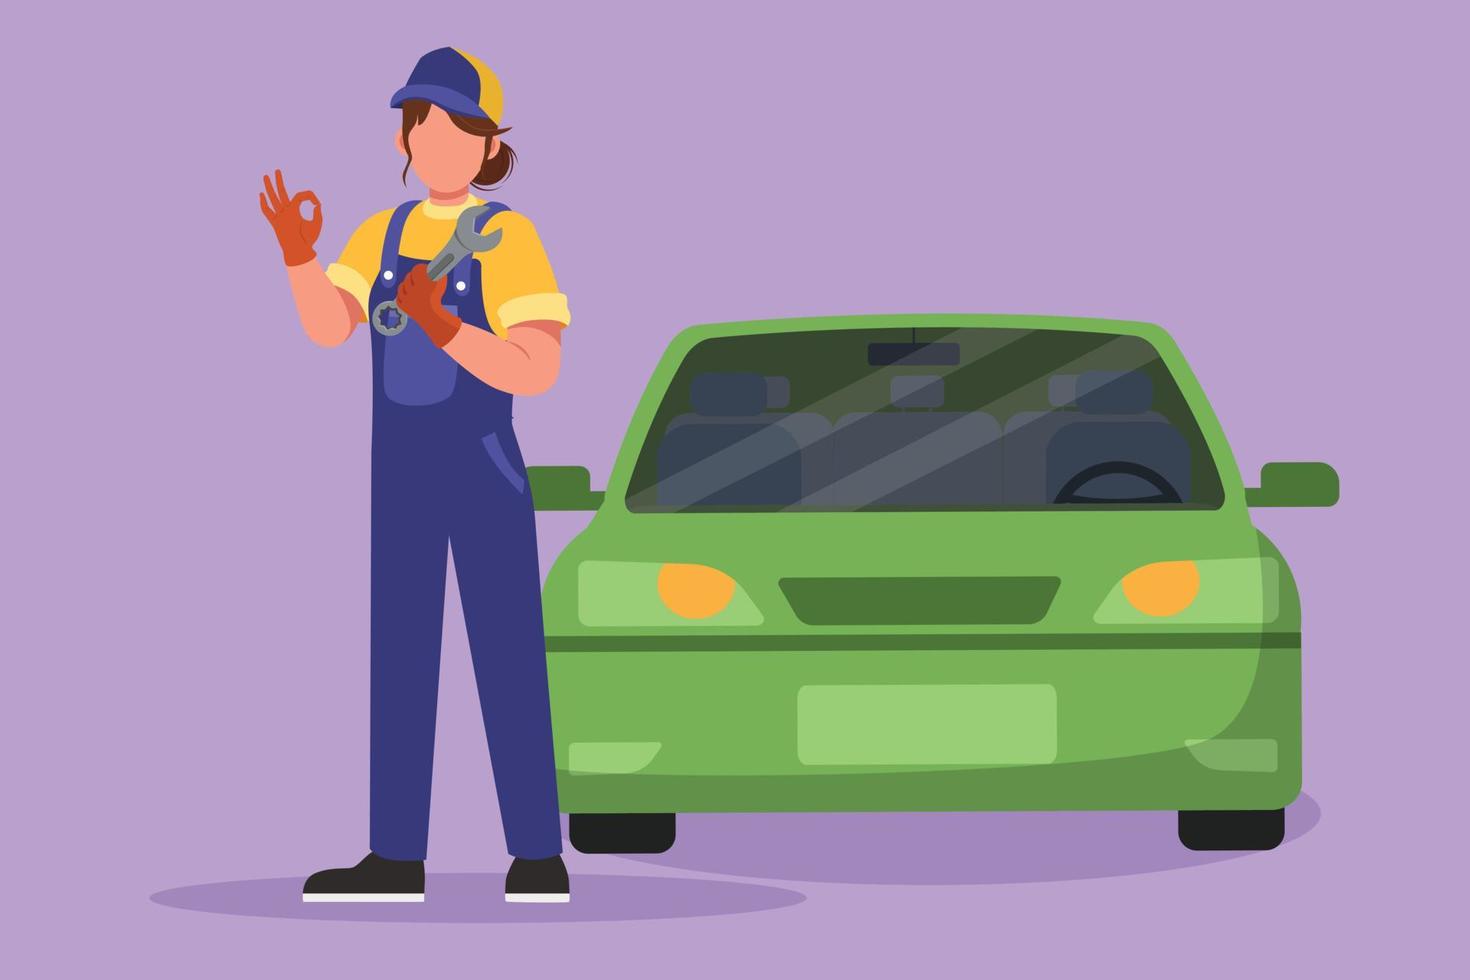 Graphic flat design drawing female mechanic standing in front of car with okay gesture and holding wrench to perform maintenance on vehicle engine or transportation. Cartoon style vector illustration